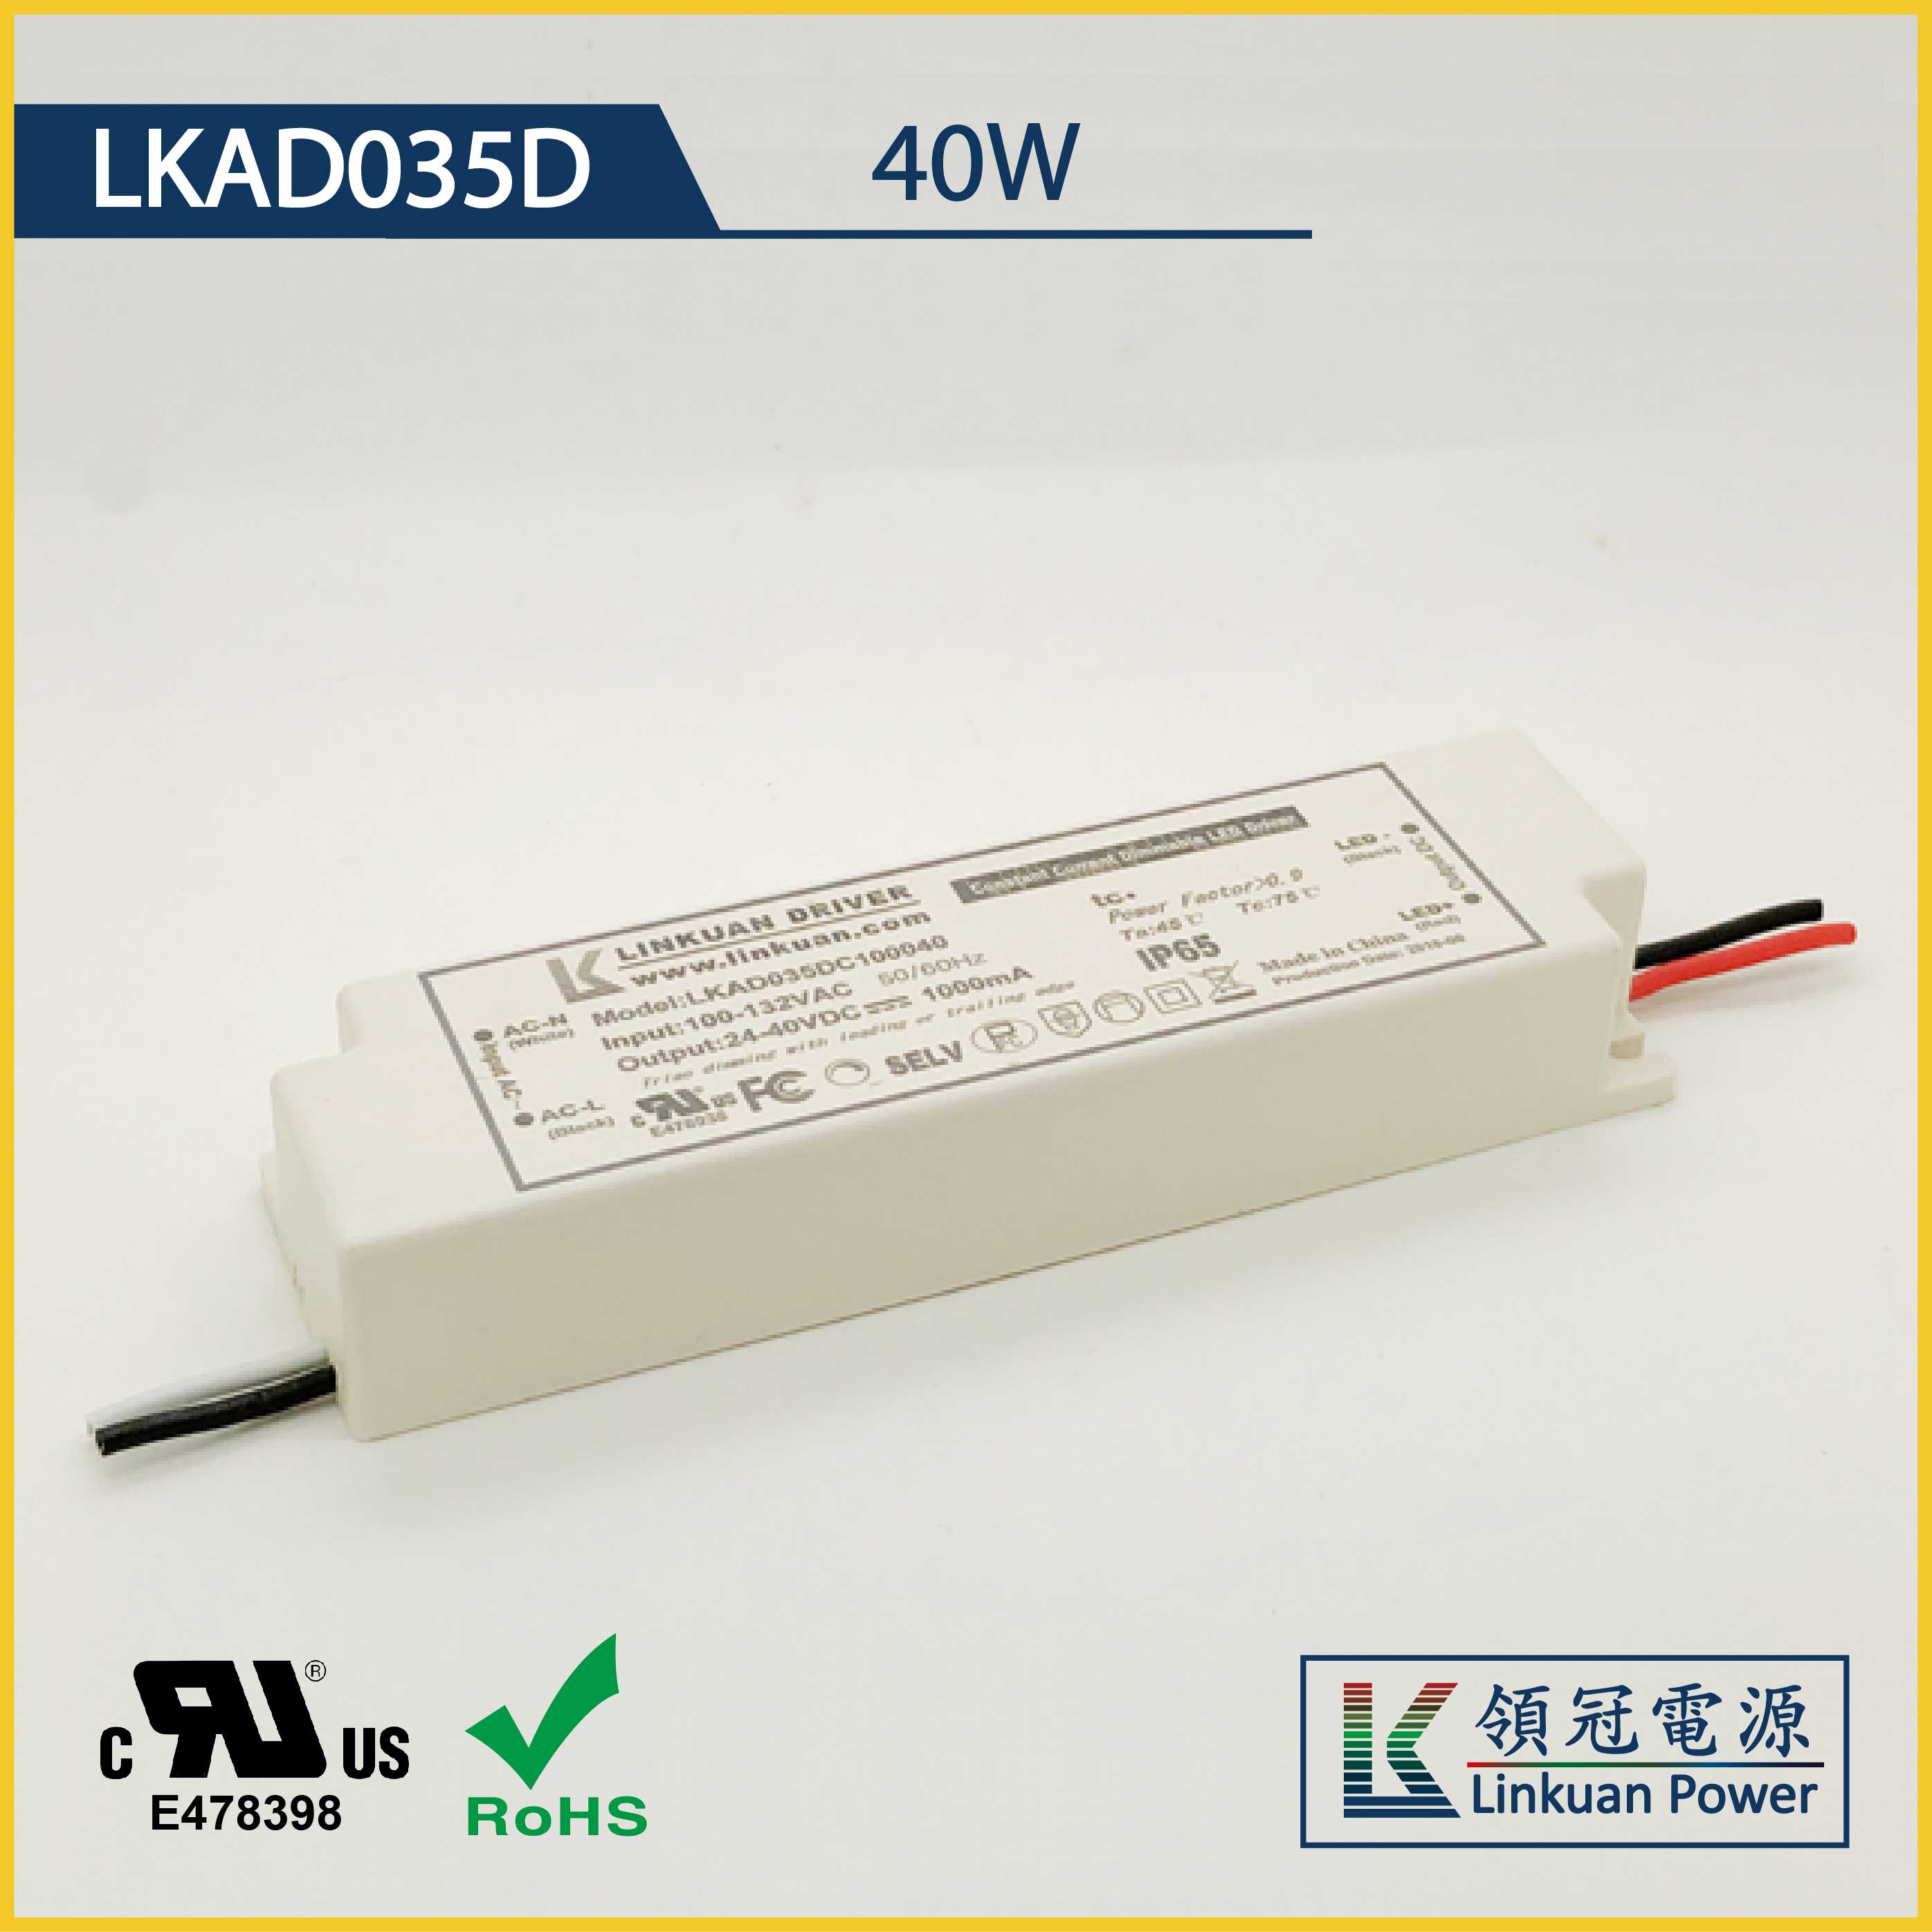 LKAD035D 40W 24-40V 1000 Dimmable LED drivers